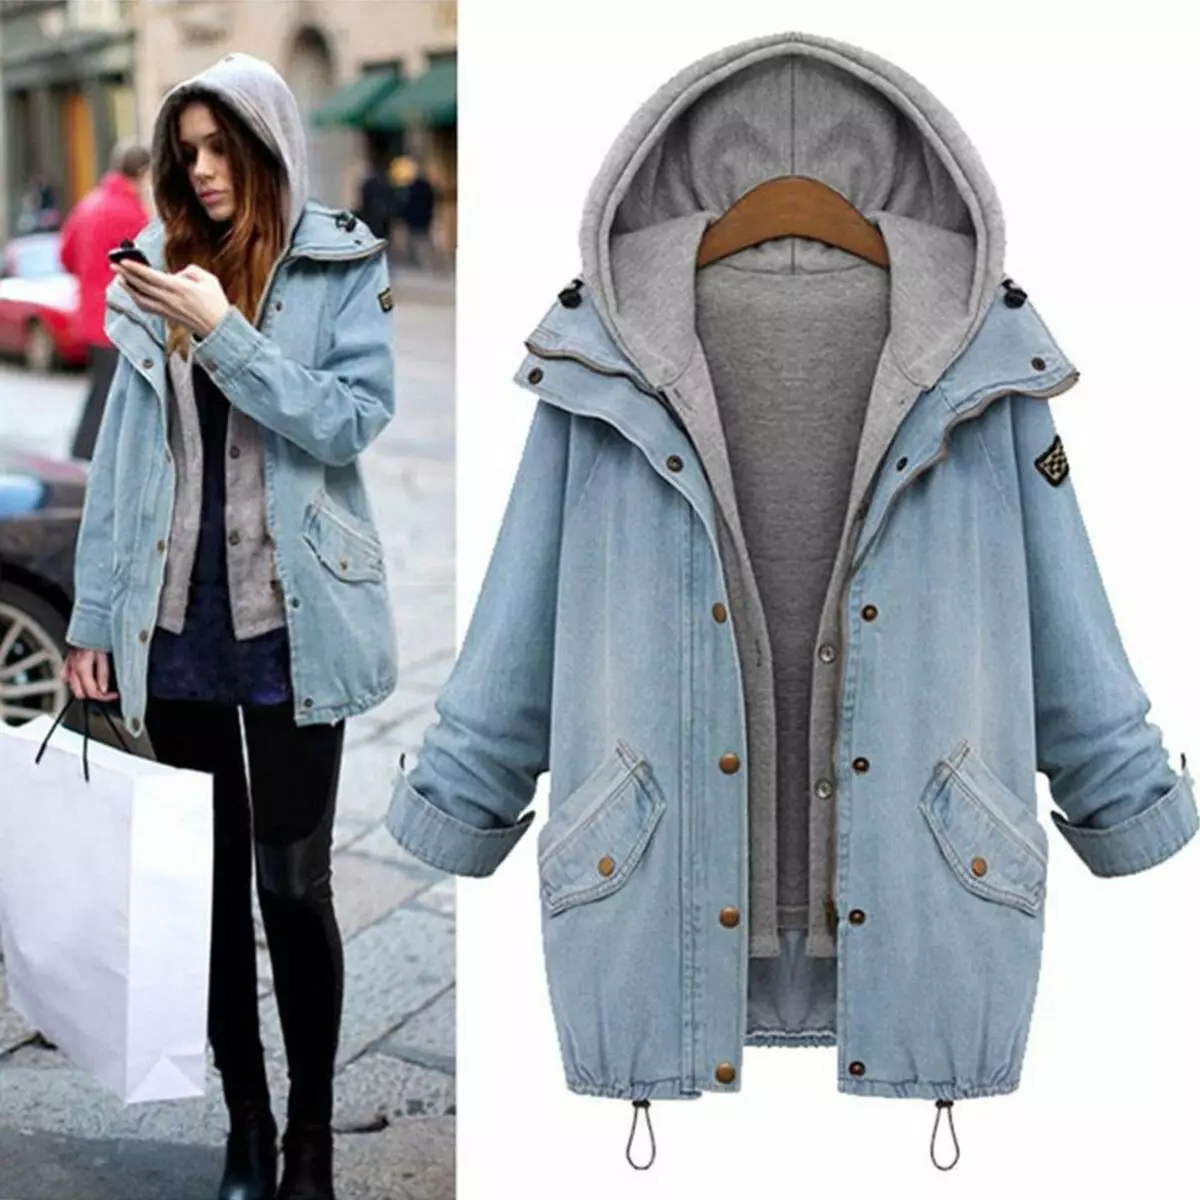 Denim Park (53 photos): from Pepe Jeans, Armani, Women's Large-Size Park Jacket, Spring, Summer, Insulated 672_26